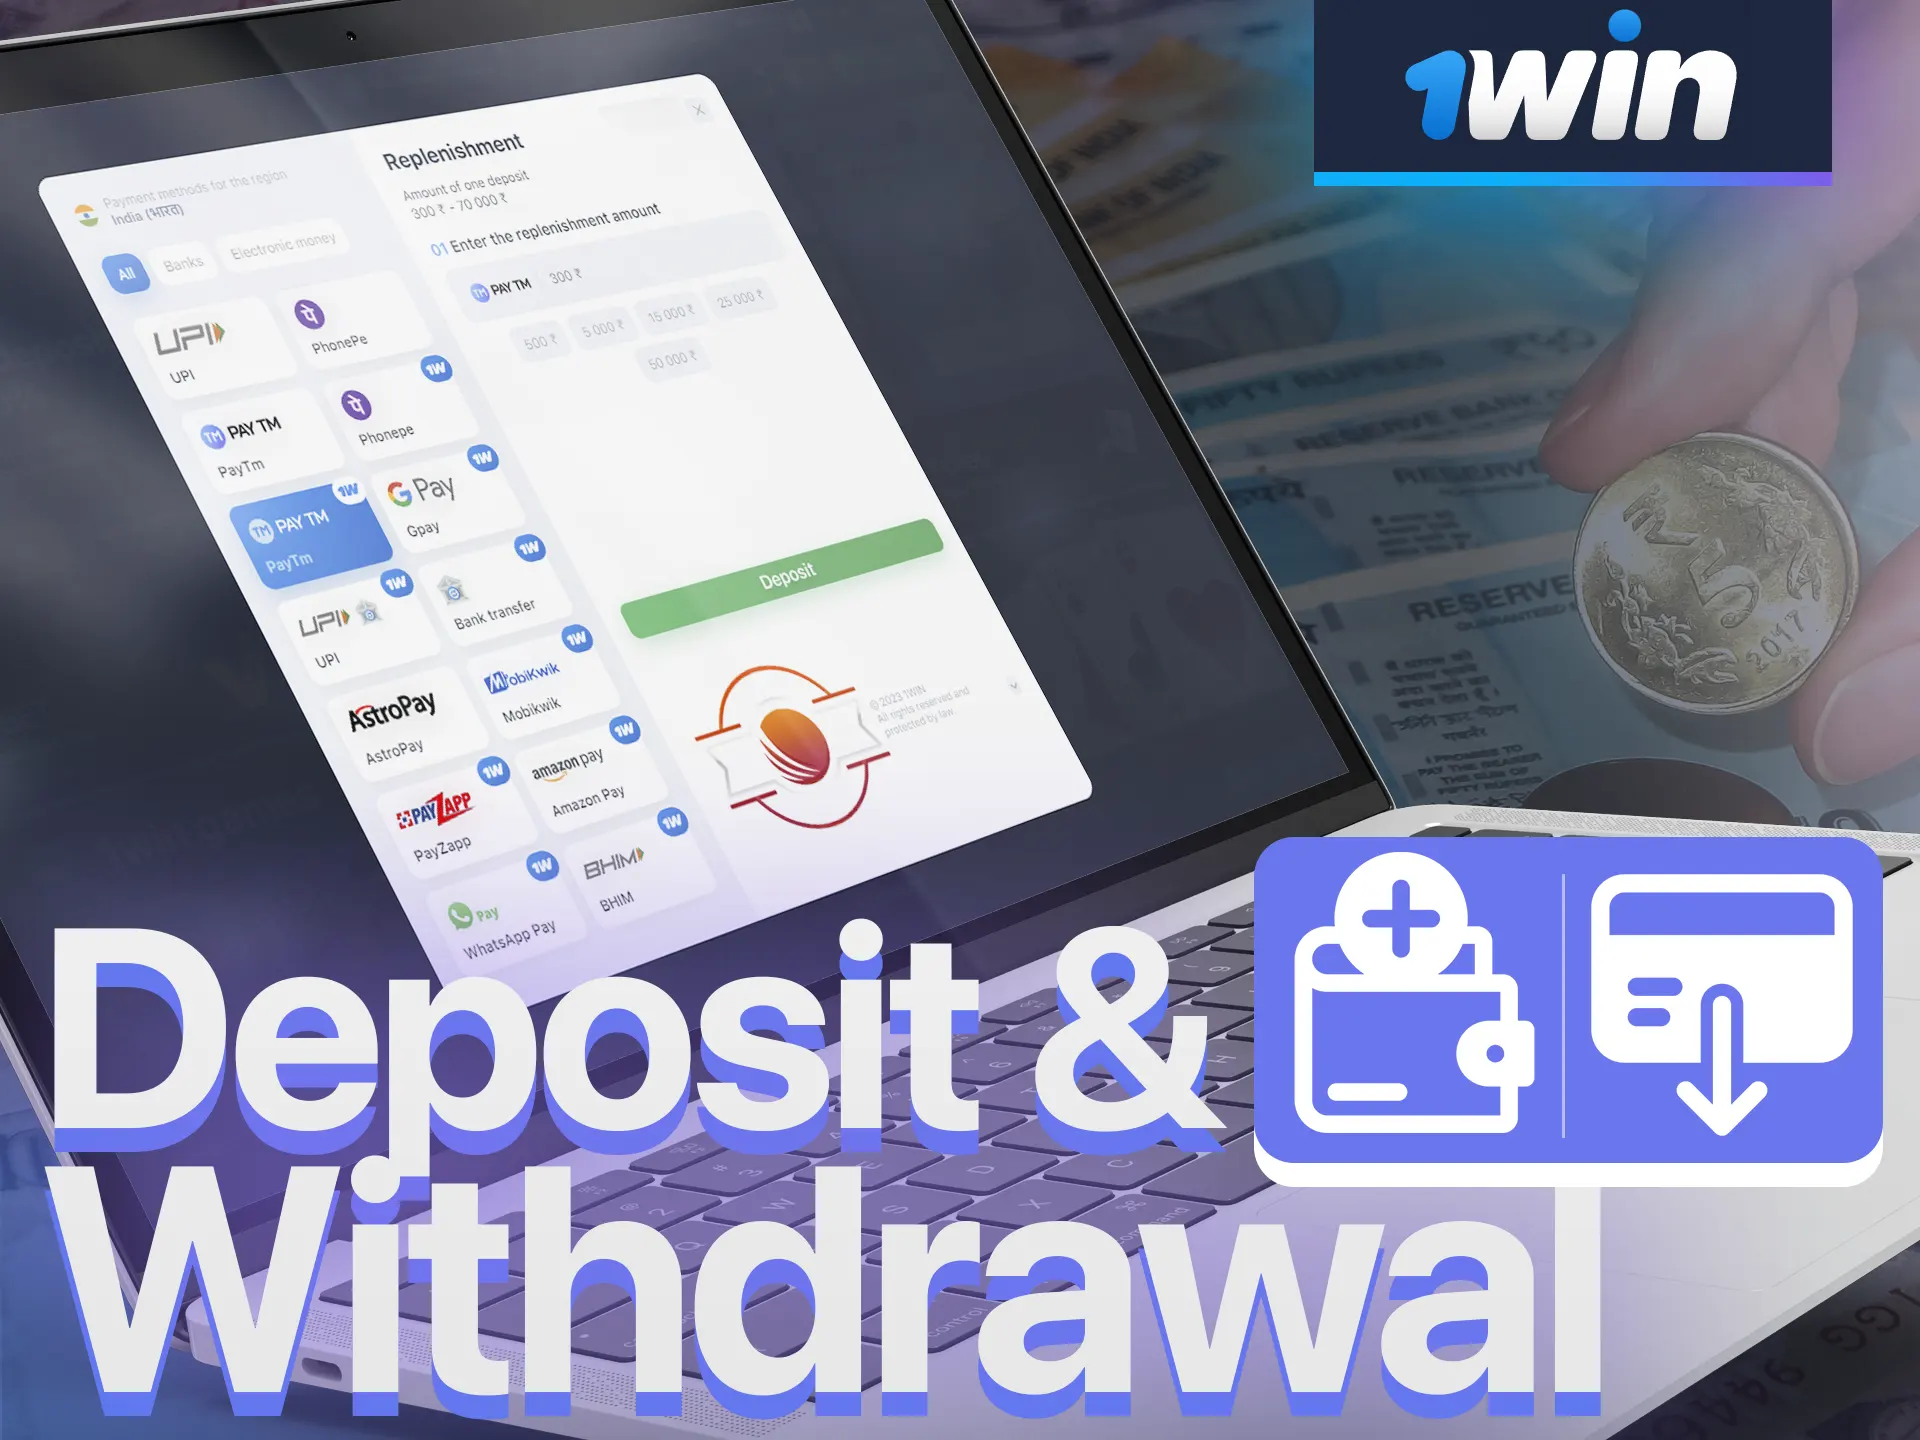 With 1Win, you can use different withdrawal and deposit methods to play poker.